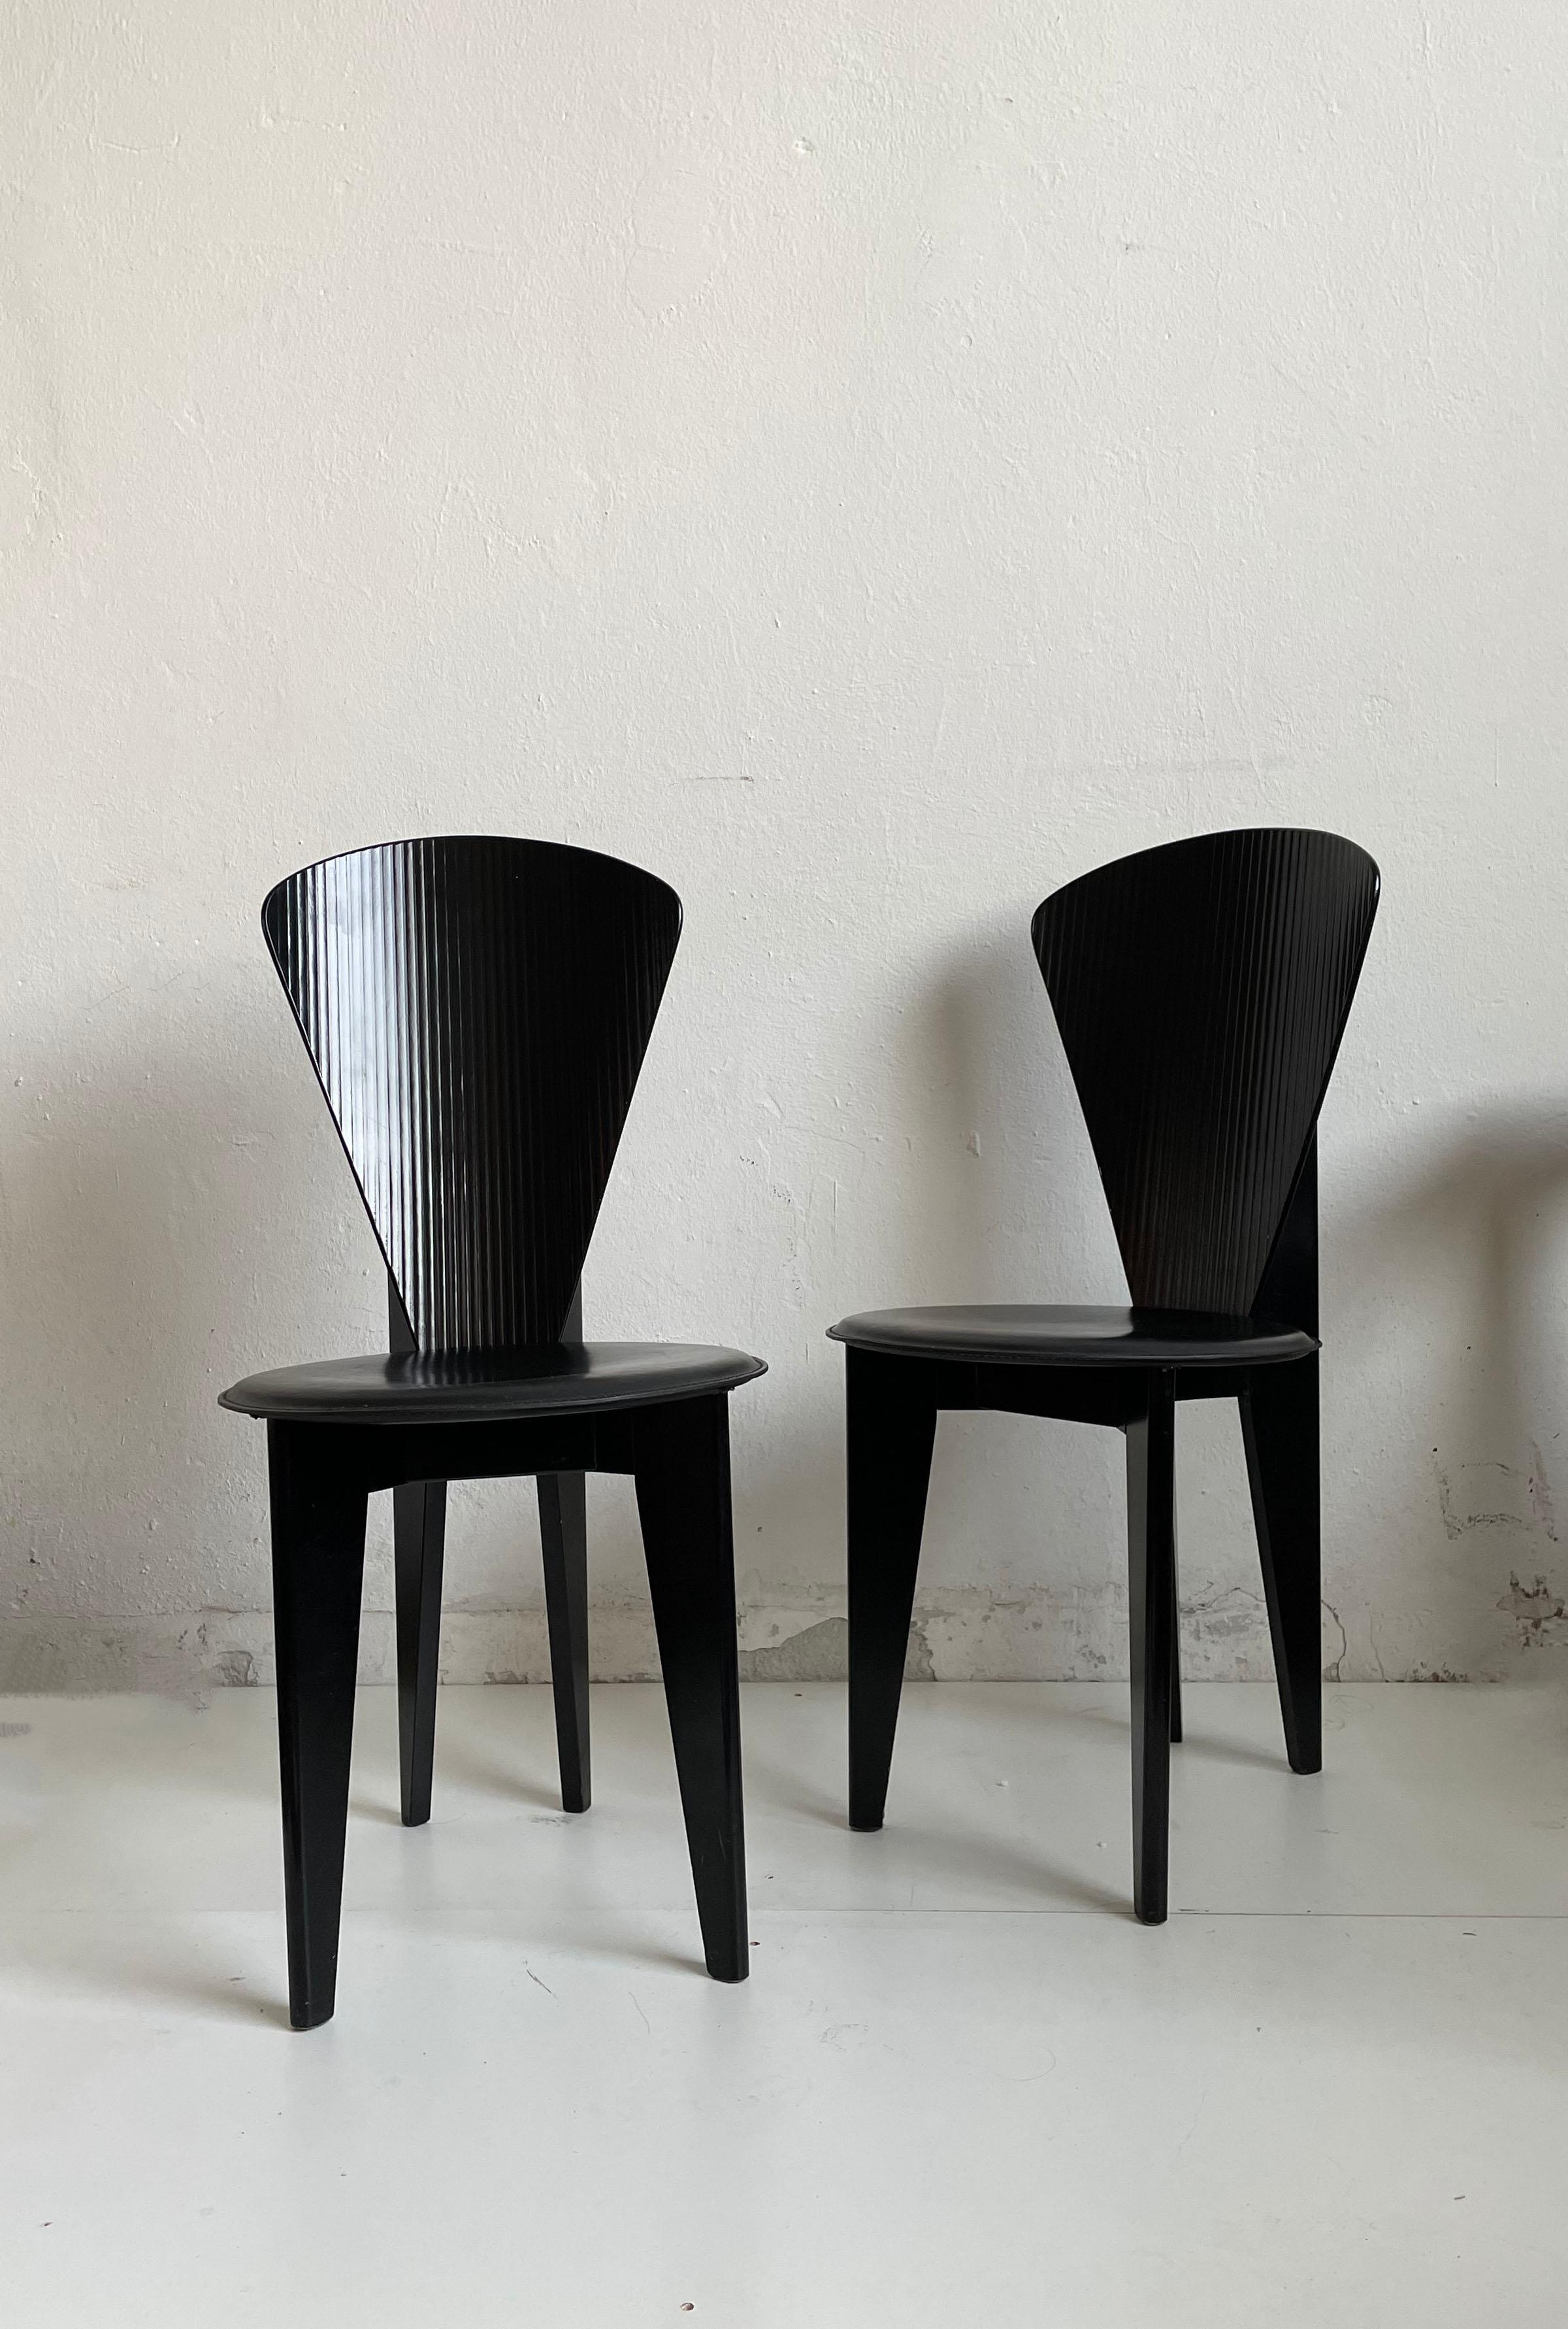 Post-Modern Postmodern Italian Calligaris Dining Chairs, Black Leather and Wood, 1980s